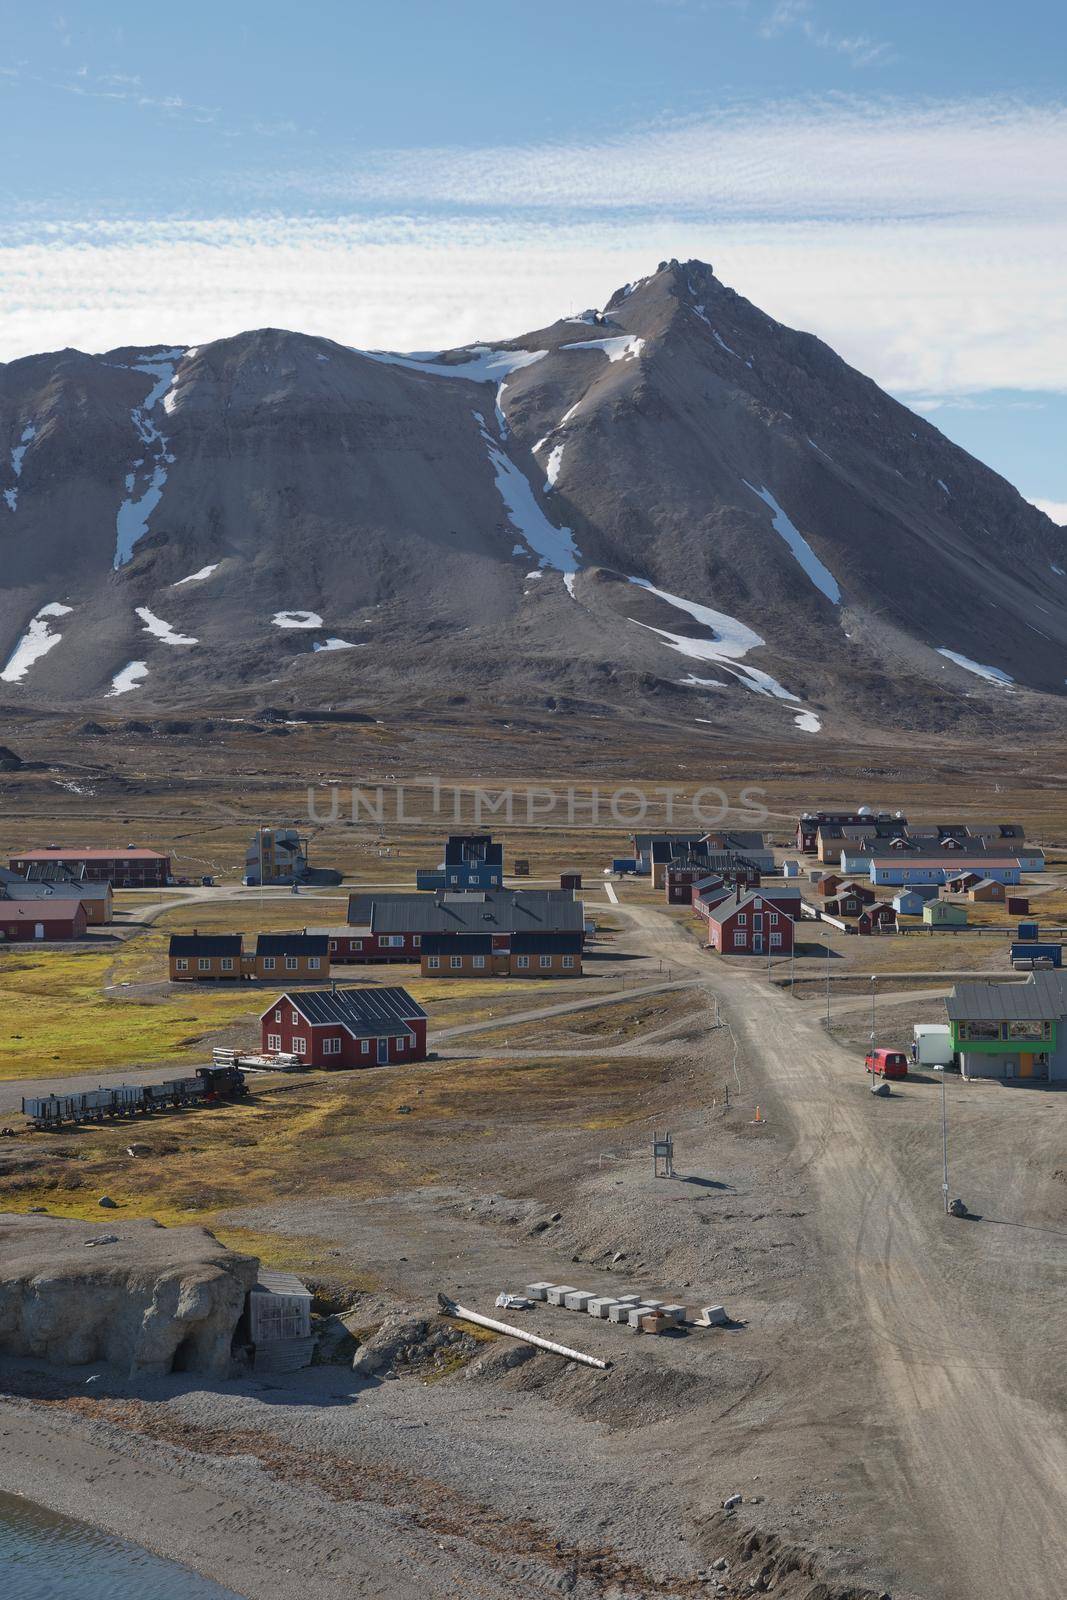 The small town of Ny Alesund in Svalbard, a Norwegian archipelago between Norway and the North Pole. This is the most northerly civilian settlement in the world by wondry